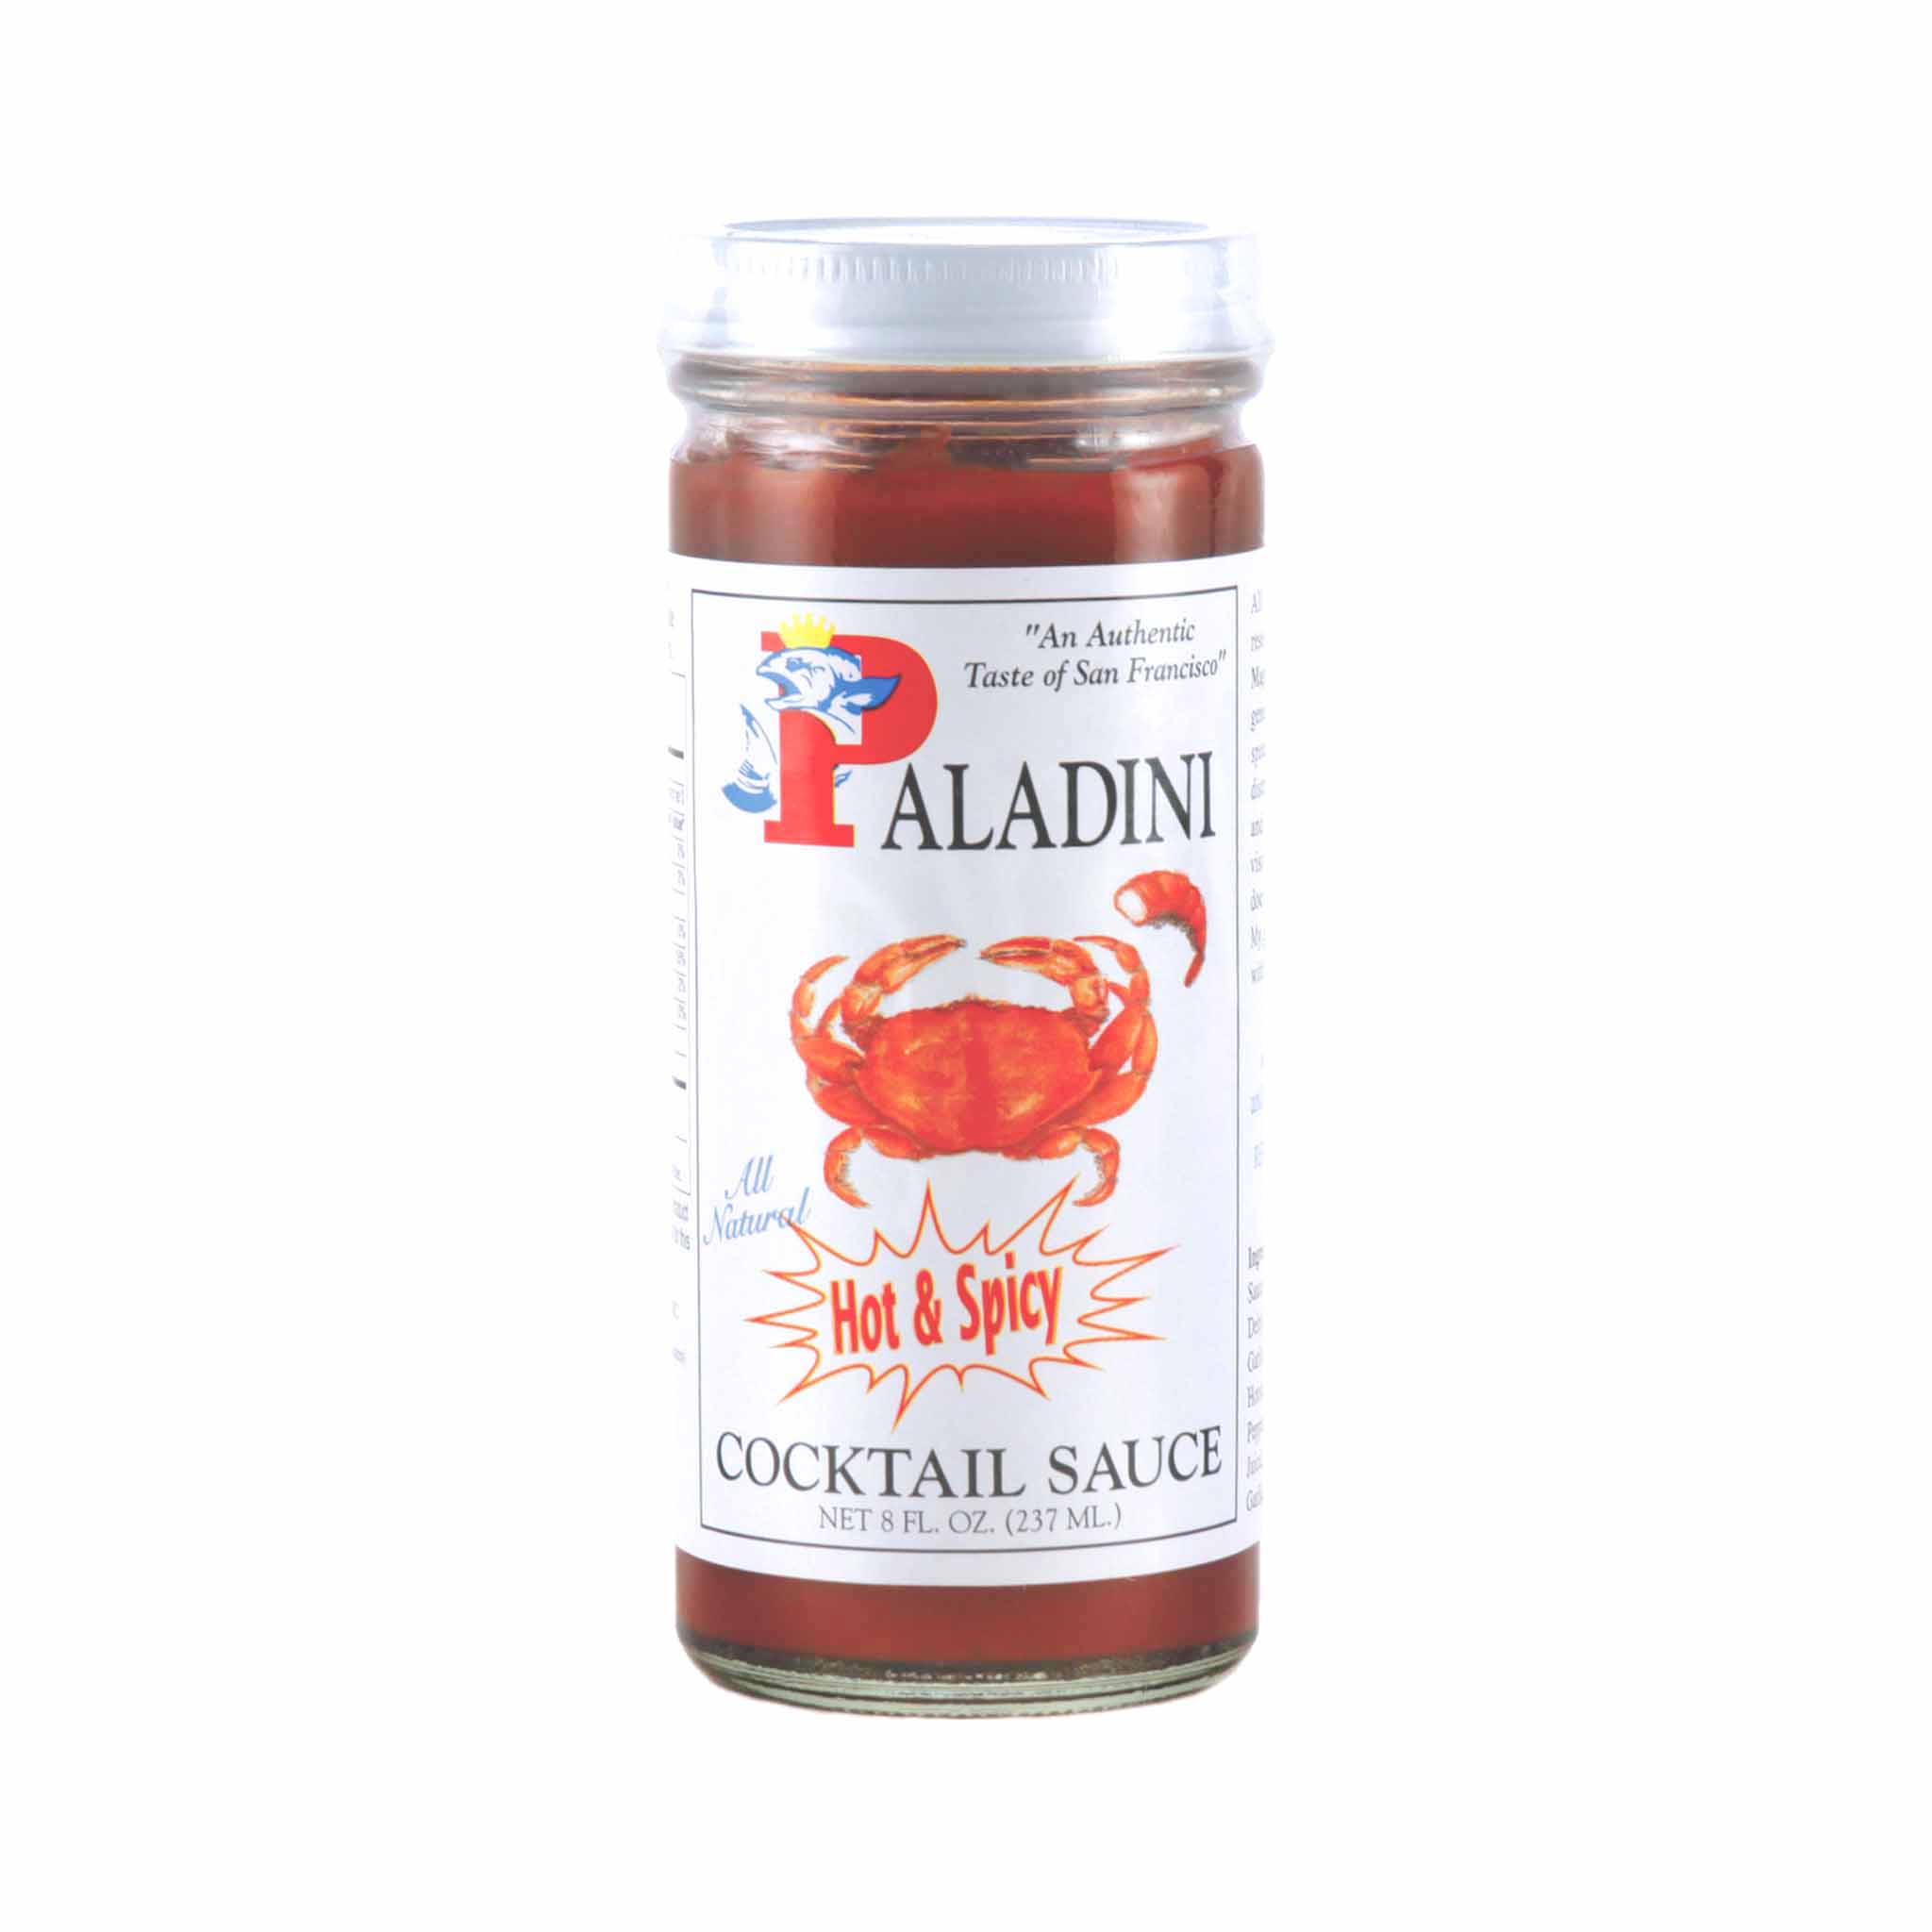 Paladini Hot and Spicy Cocktail Sauce All Natural